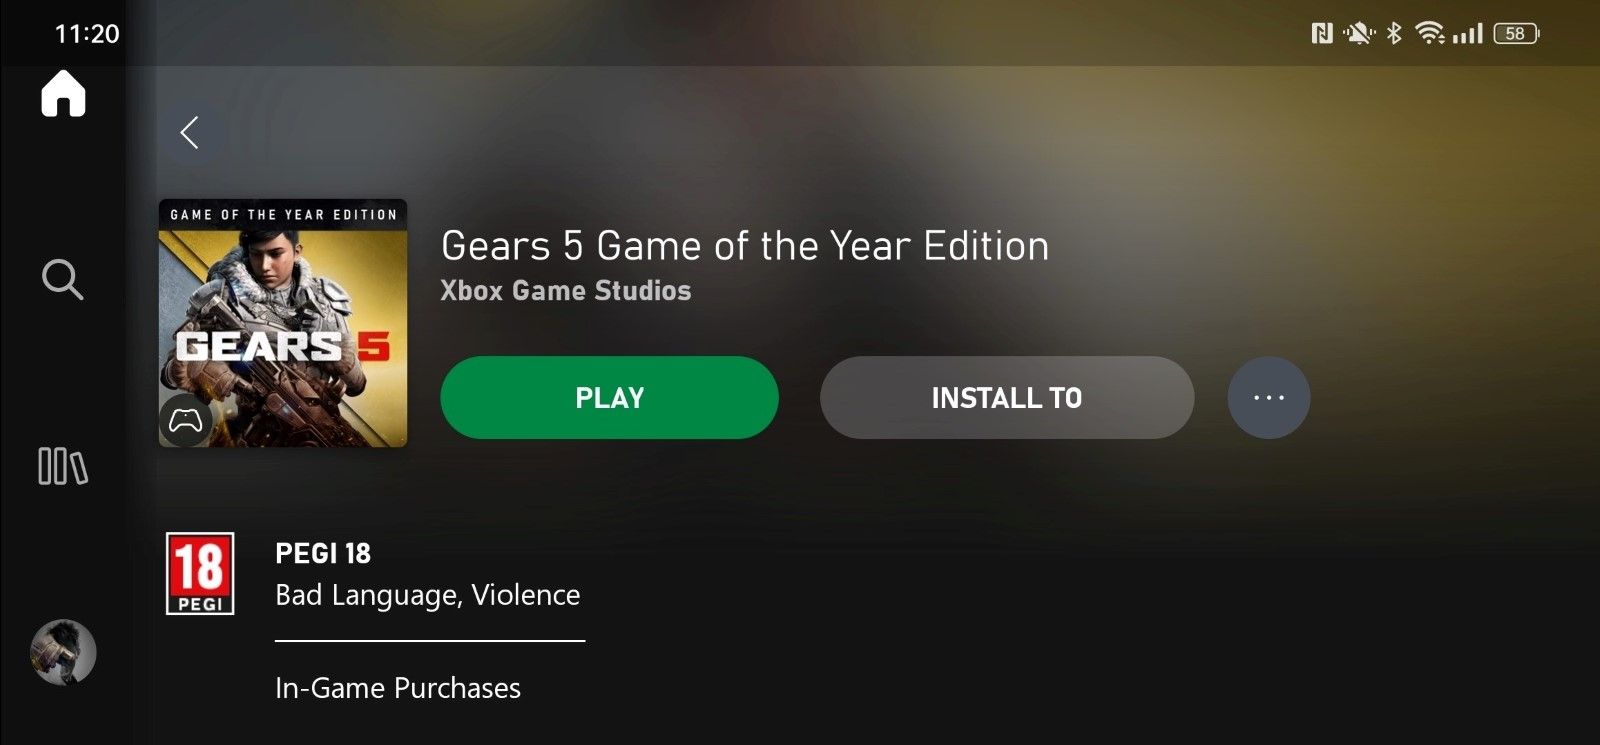 A screenshot of the Xbox Game Pass app on mobile highlighting the Gears 5 Game of the Year Edition listing